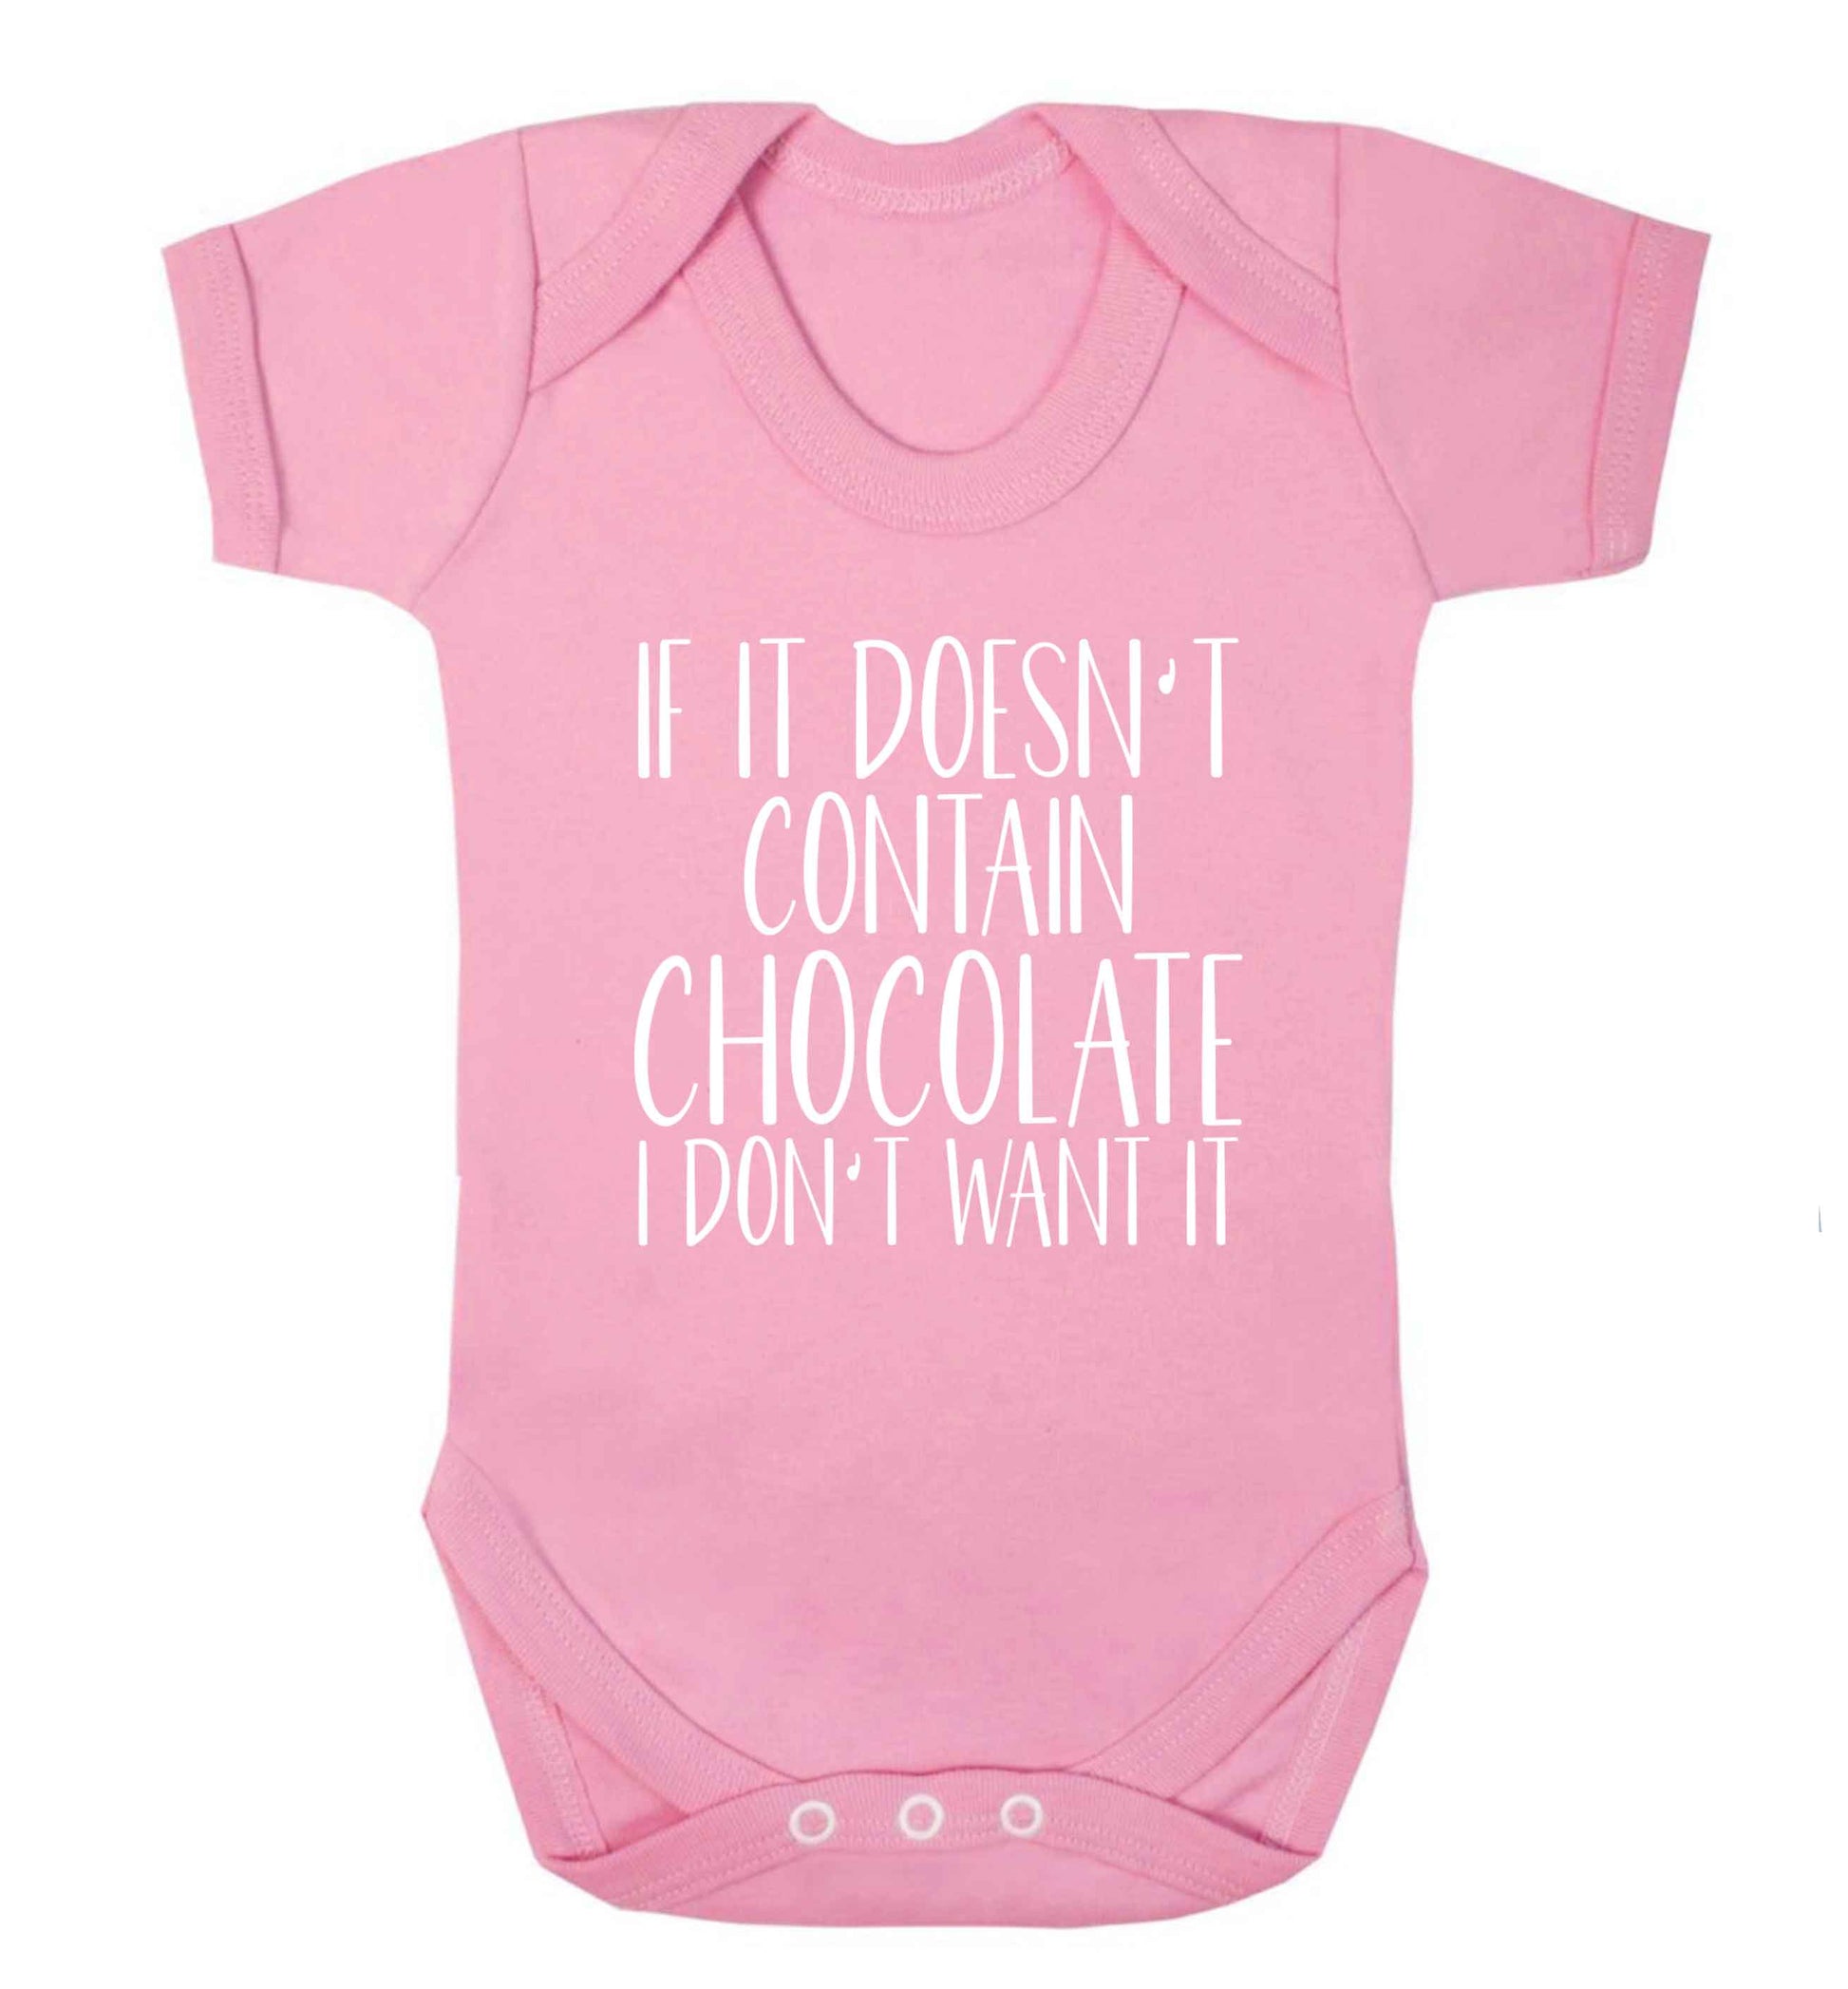 If it doesn't contain chocolate I don't want it baby vest pale pink 18-24 months